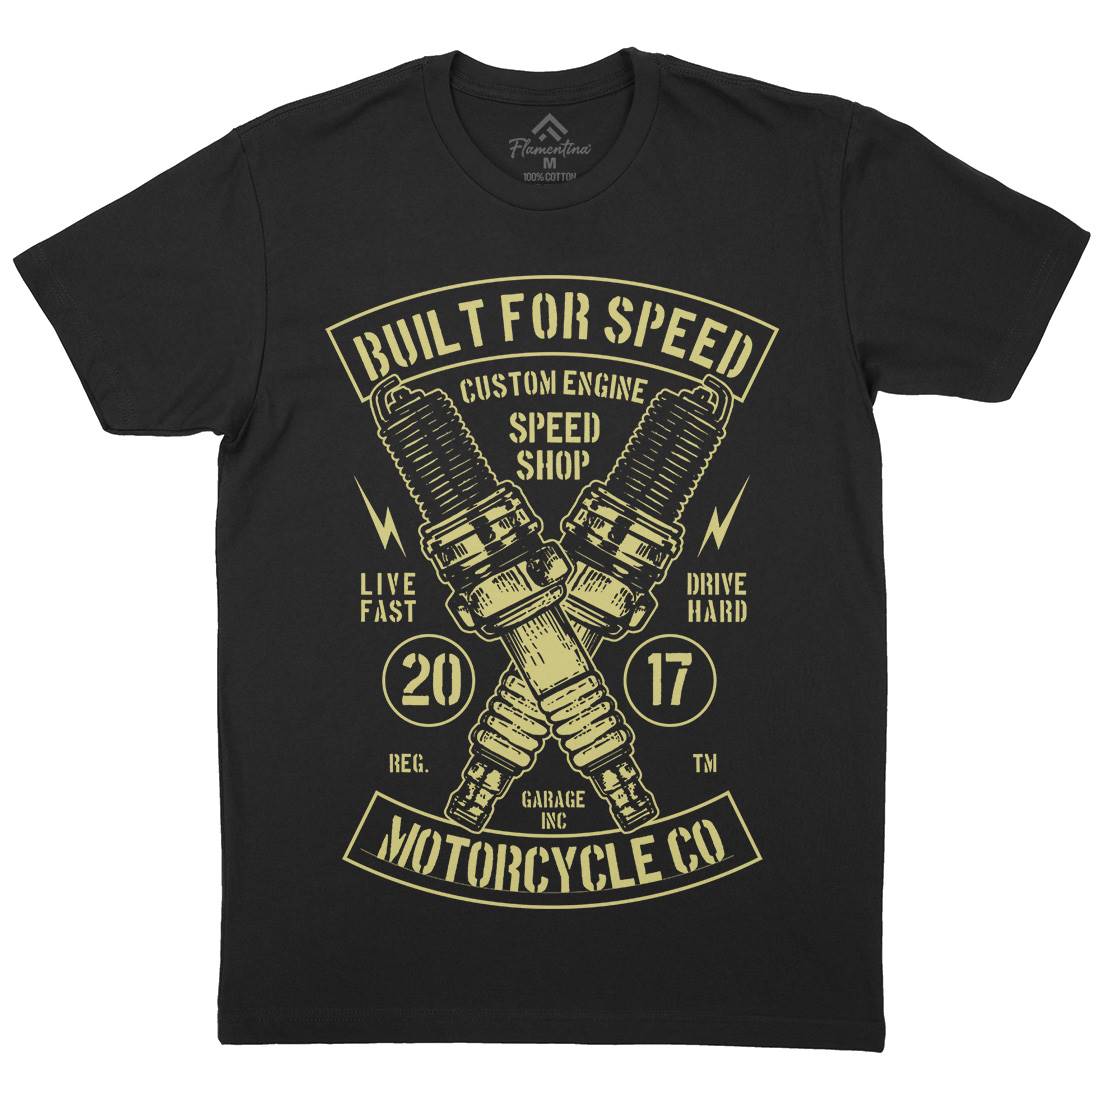 Built For Speed Mens Organic Crew Neck T-Shirt Motorcycles B188